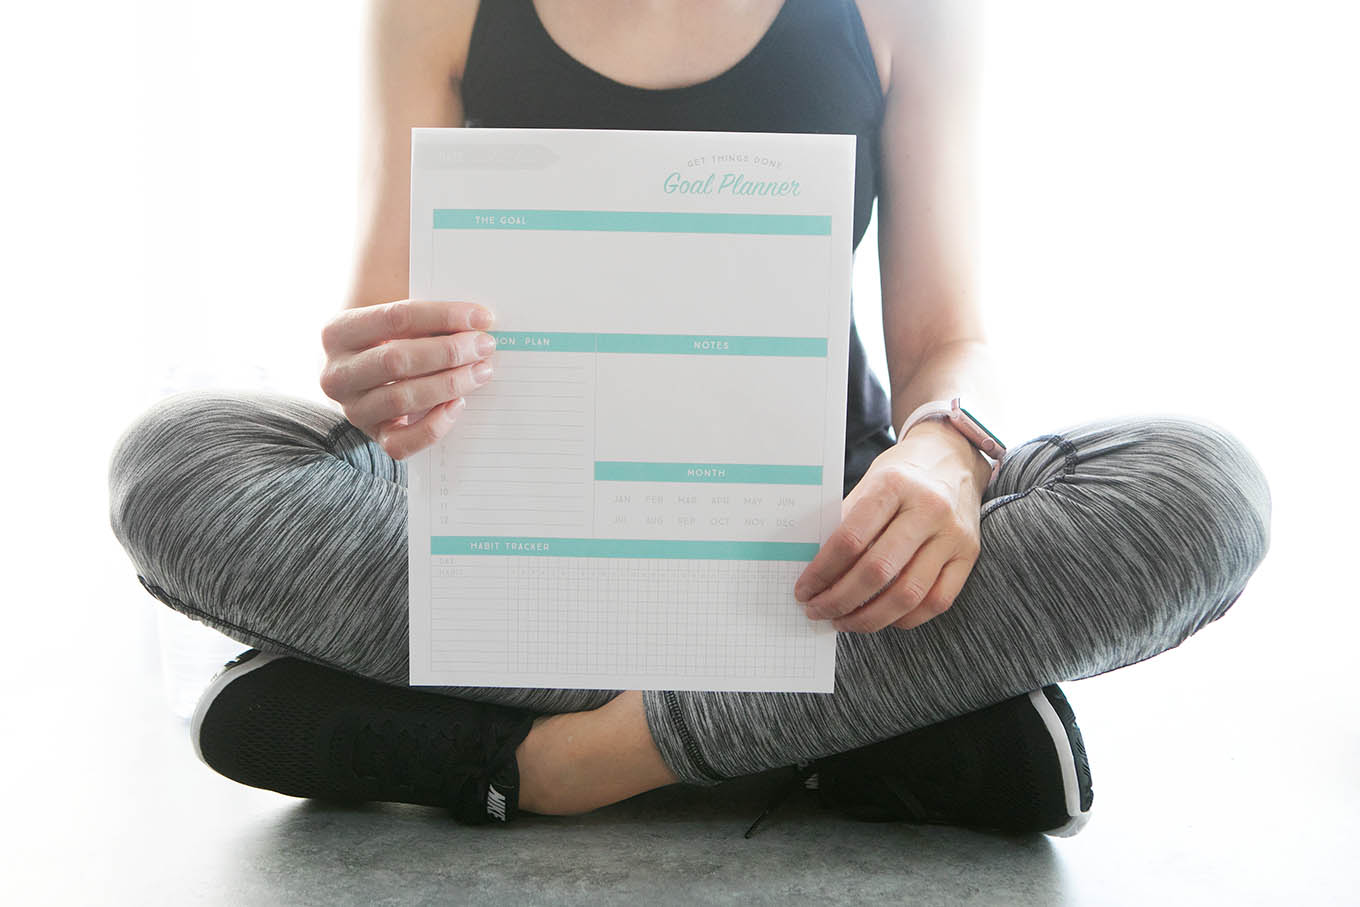 Get ready to crush your goals with this powerful goal planner! It's functional, concise and printer friendly. This is a tool that will help you move from setting goals to achieving them.